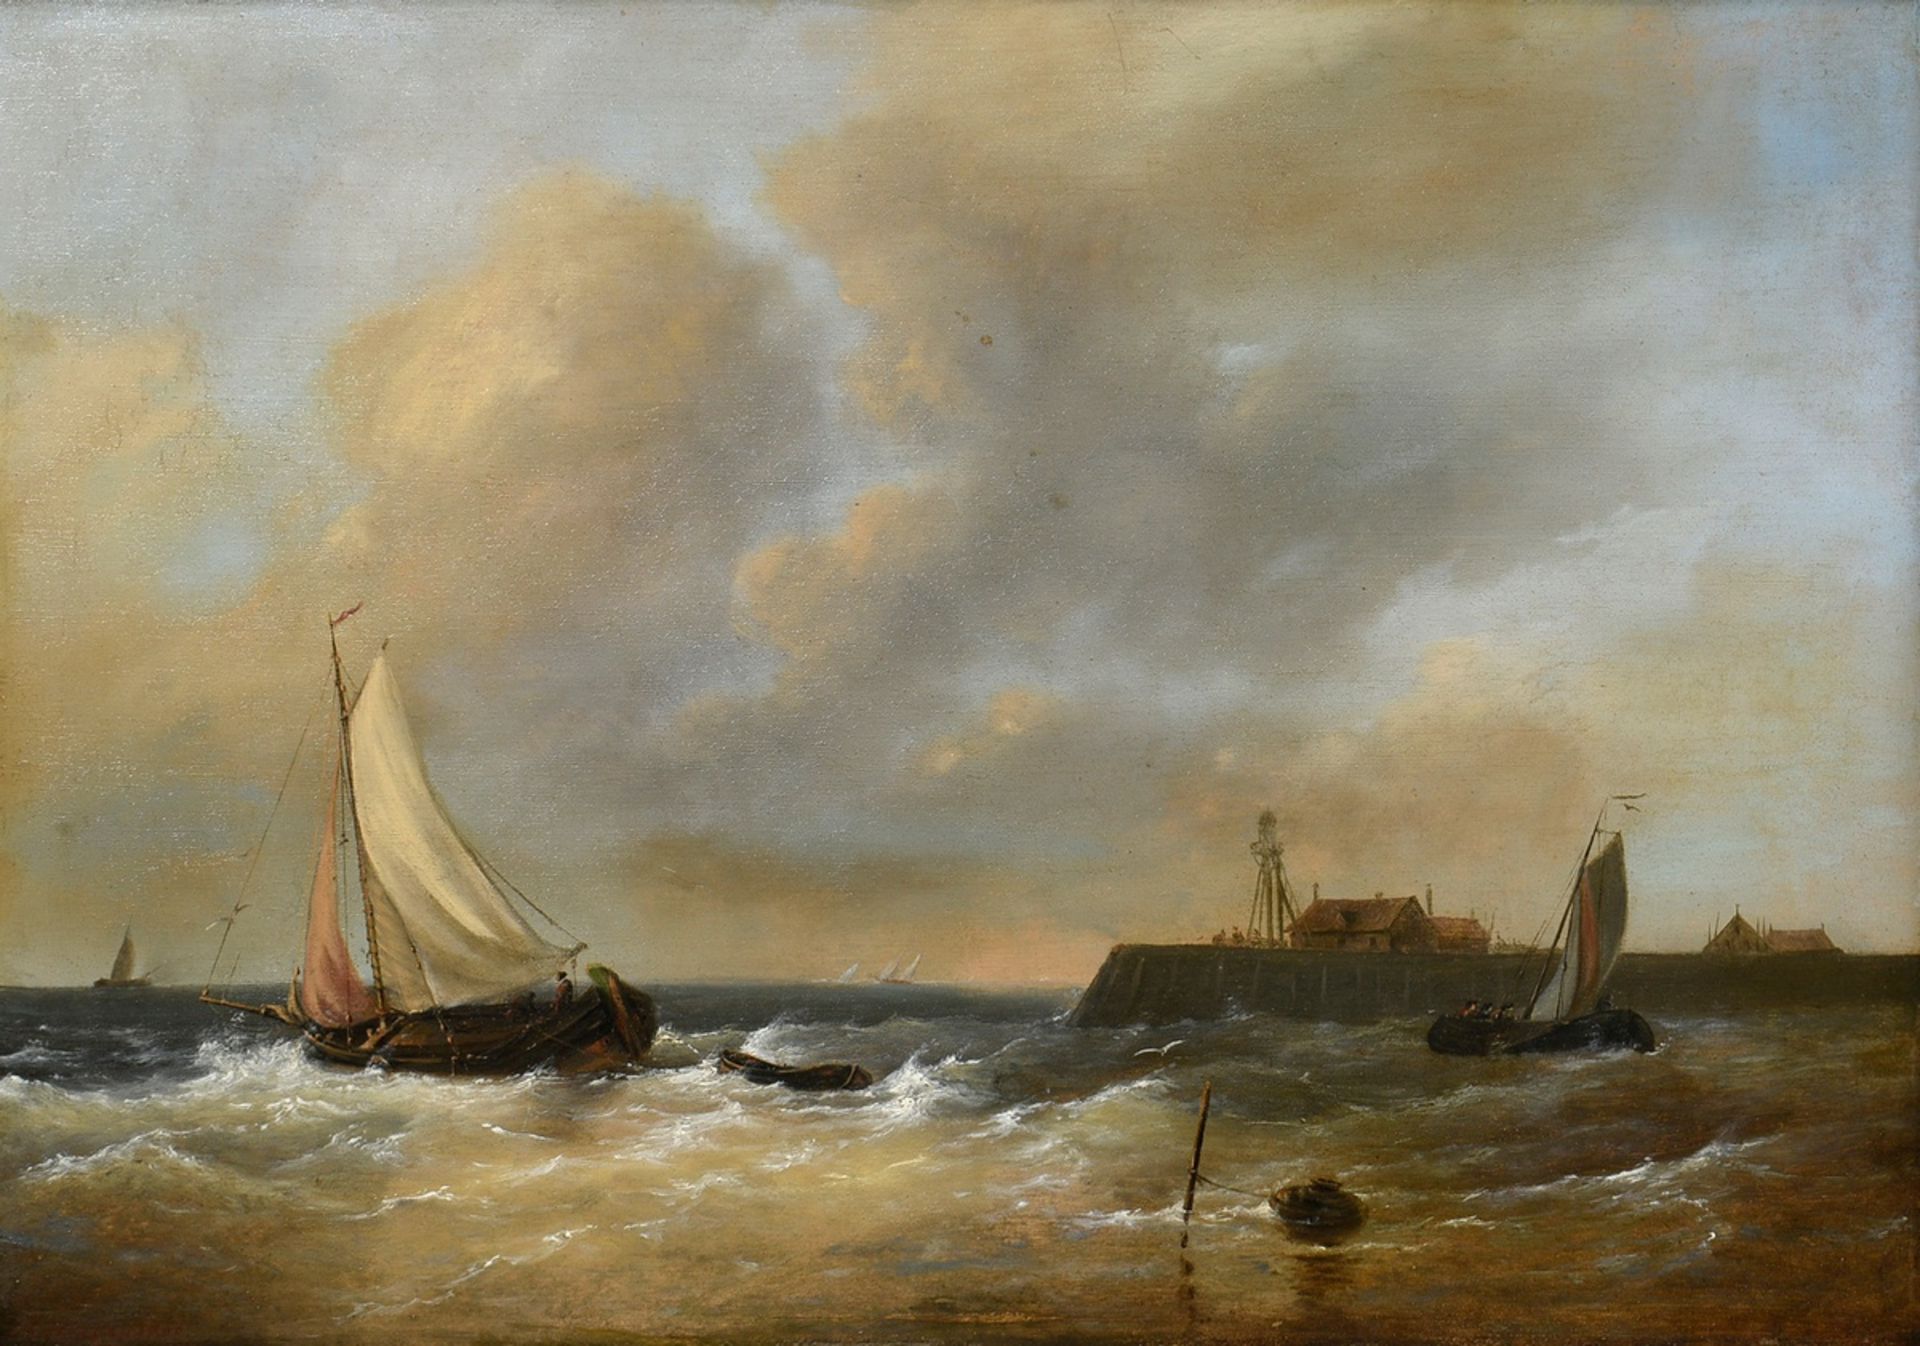 Hulk, Abraham I (1813-1897) "Two sailors in front of stormy coast" 1866, oil/wood, lower left signe